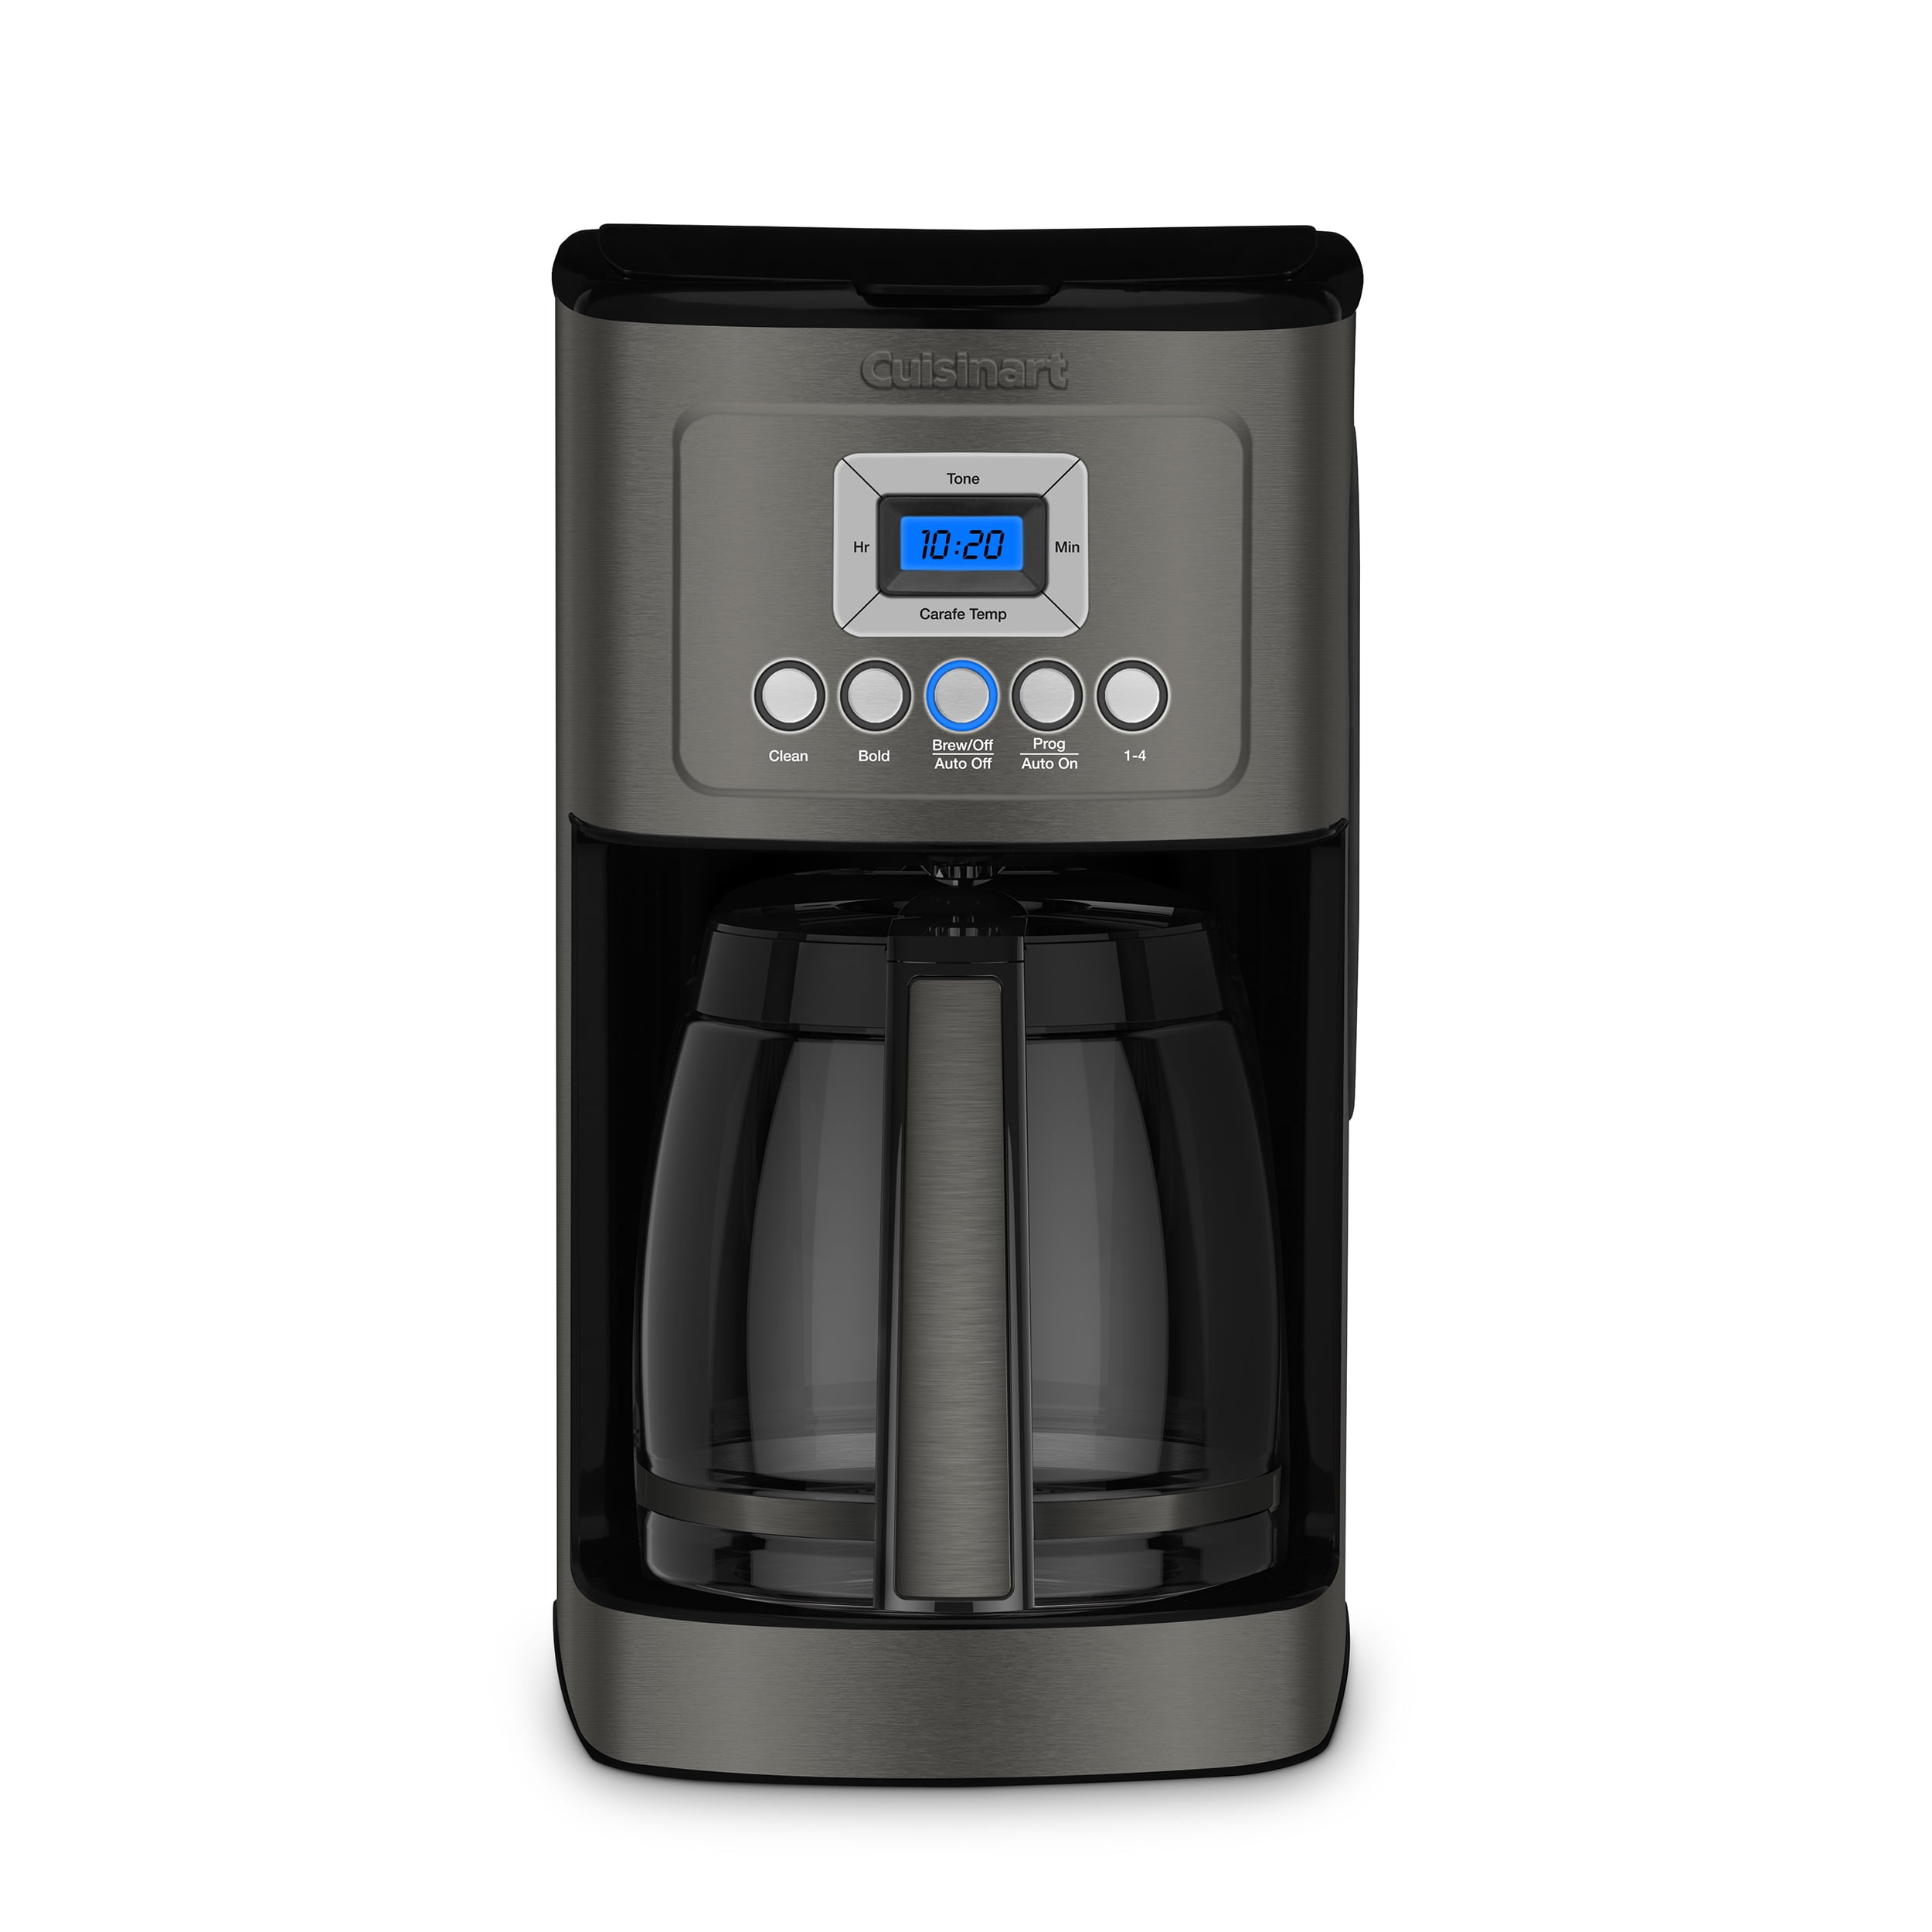 Cuisinart DCC-1220WM 12 Cup Stainless Steel Coffee Maker